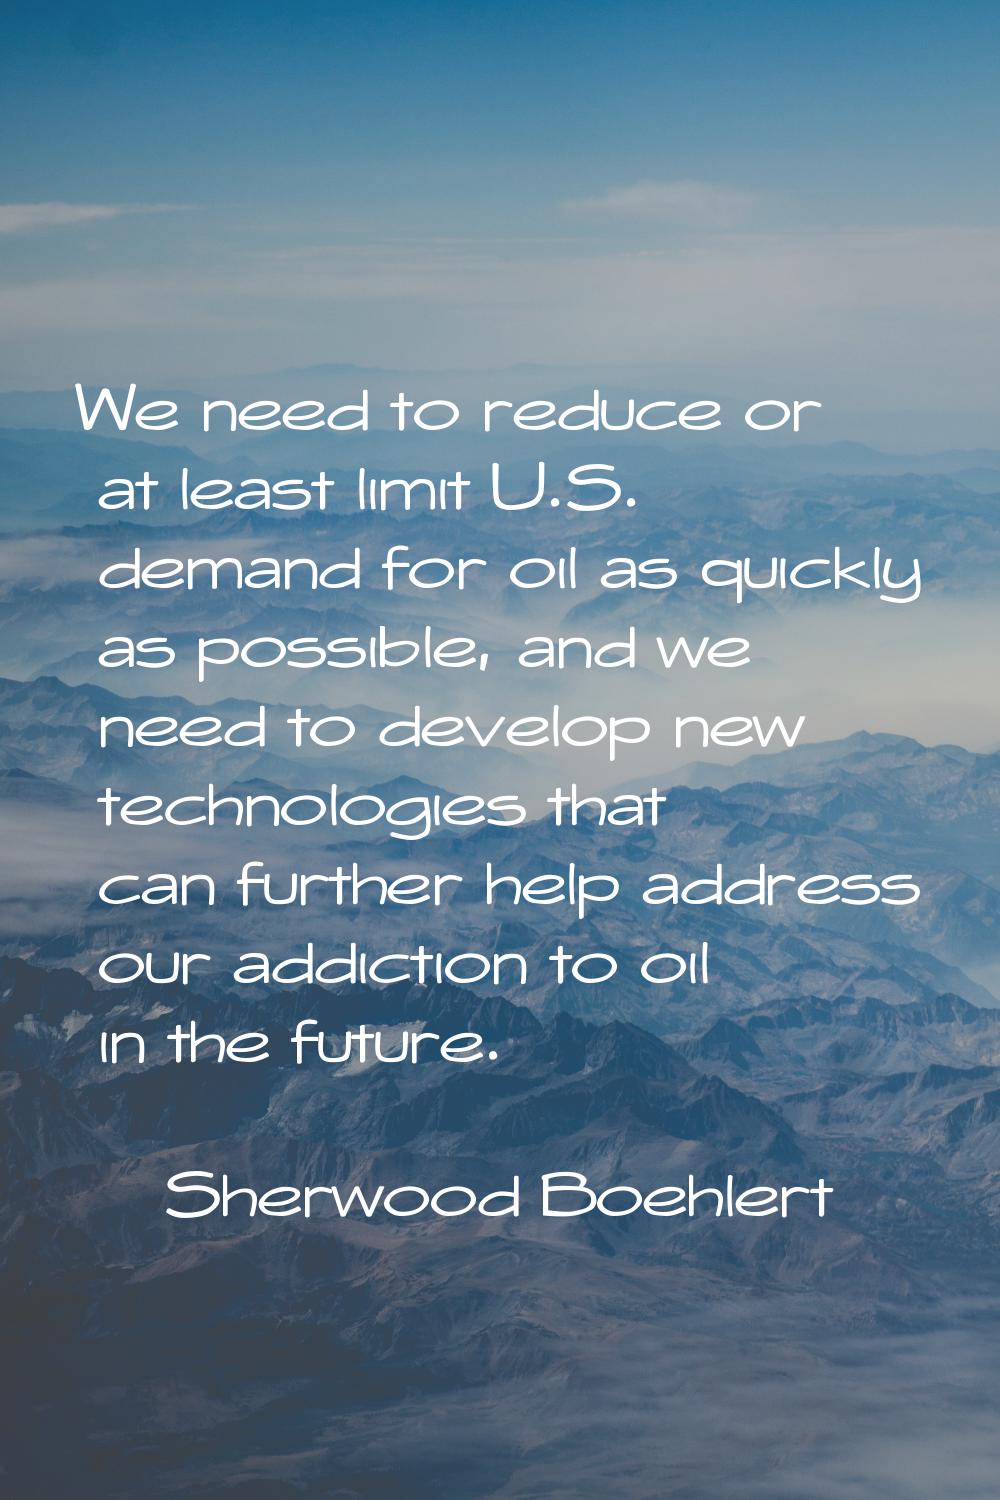 We need to reduce or at least limit U.S. demand for oil as quickly as possible, and we need to deve